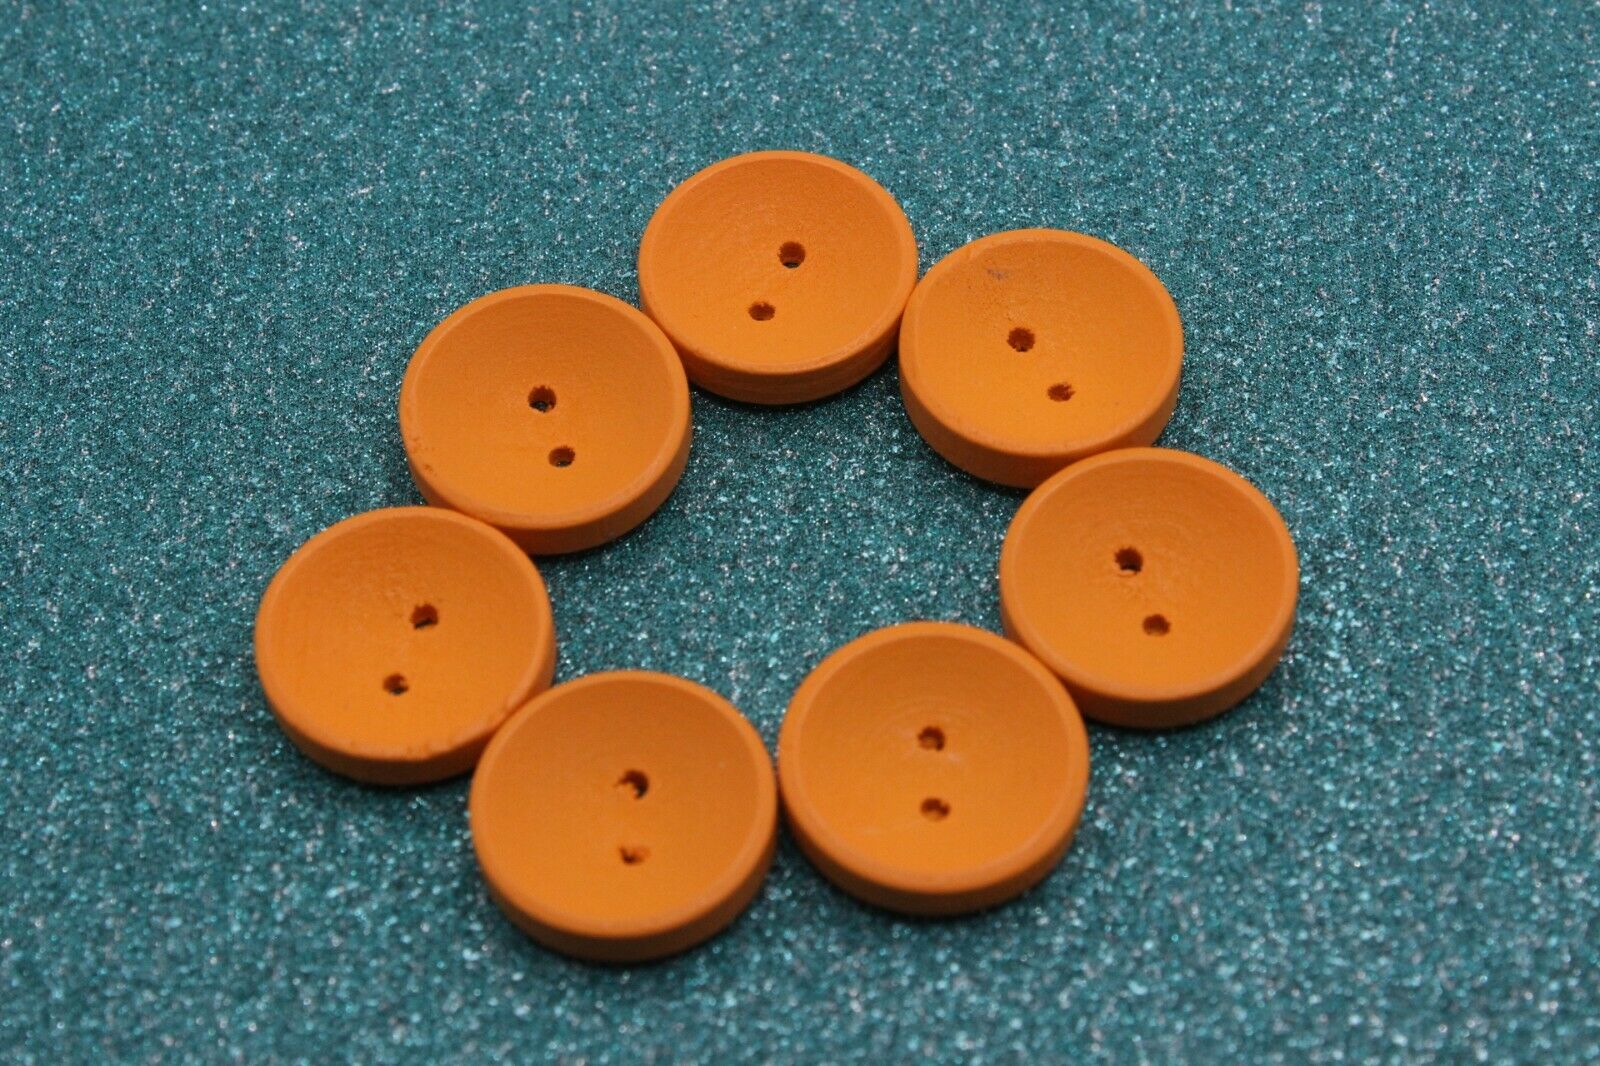 Renashed 50Pcs Mixed Color Design Wooden Buttons in Bulk for Crafts  Scrapbooking or Sewing and DIY Craft (30mm)